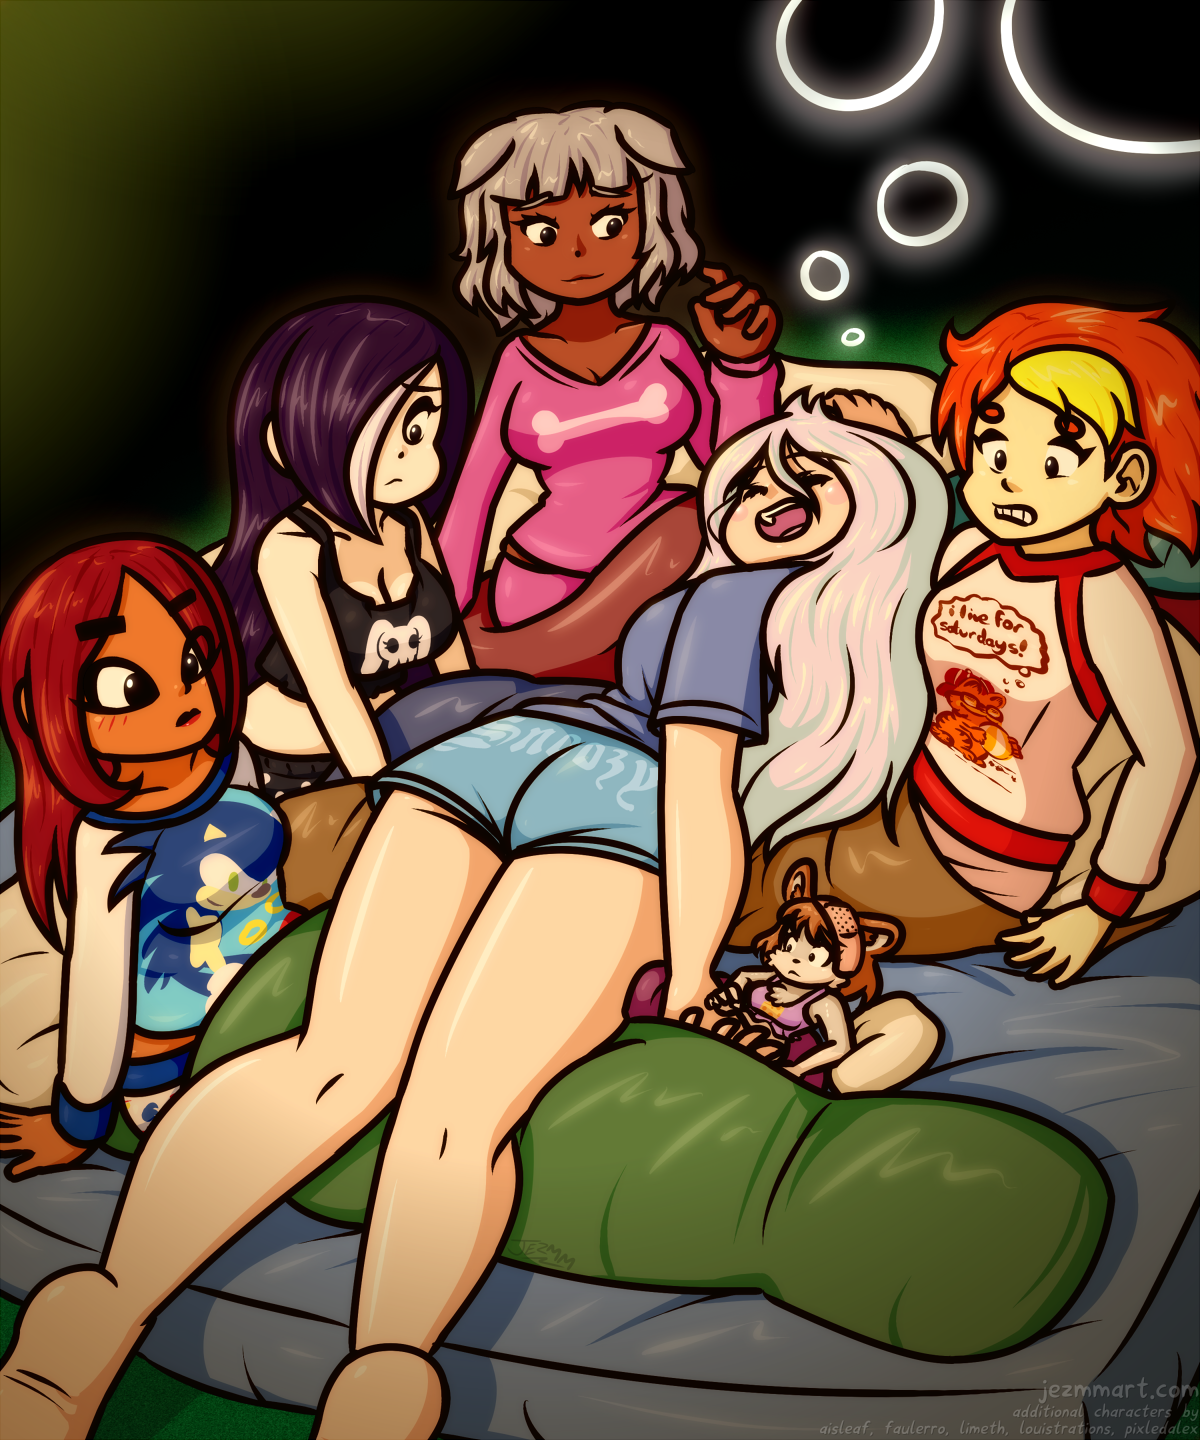 Bedruary Day 24 - Sleepover: Bed Time